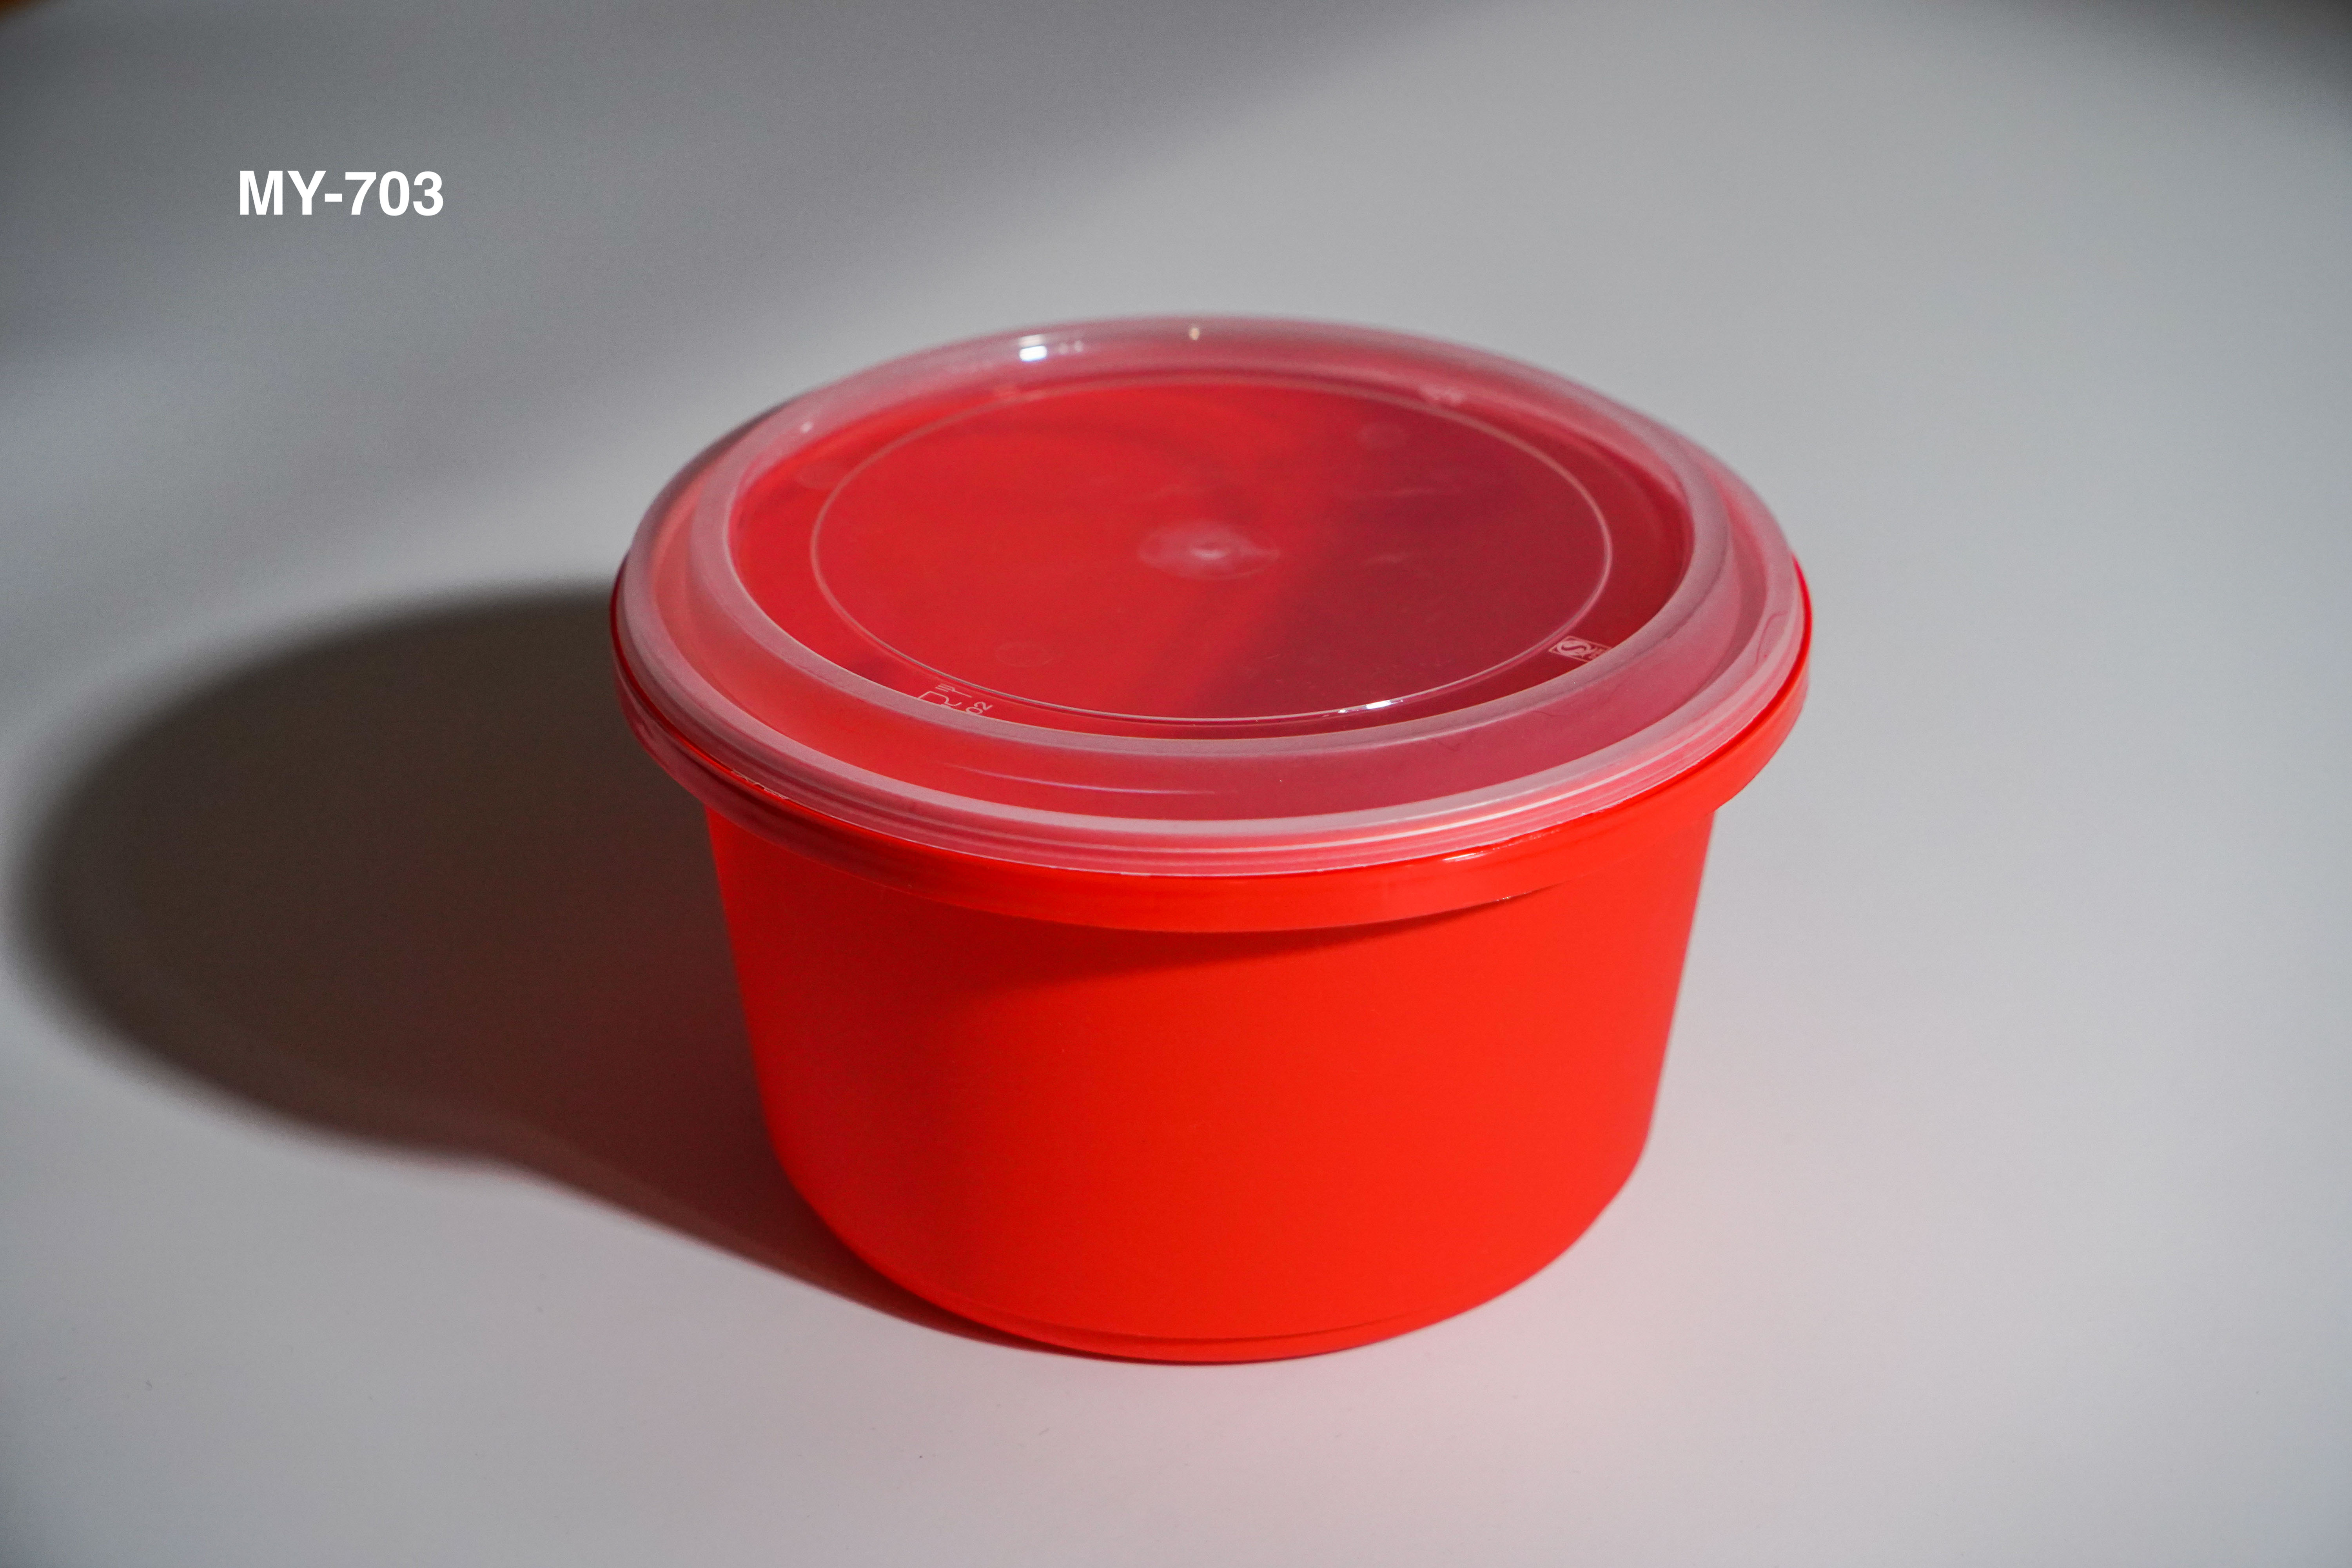 Best Plastic Food Storage Containers, According to Our Expert Tests/